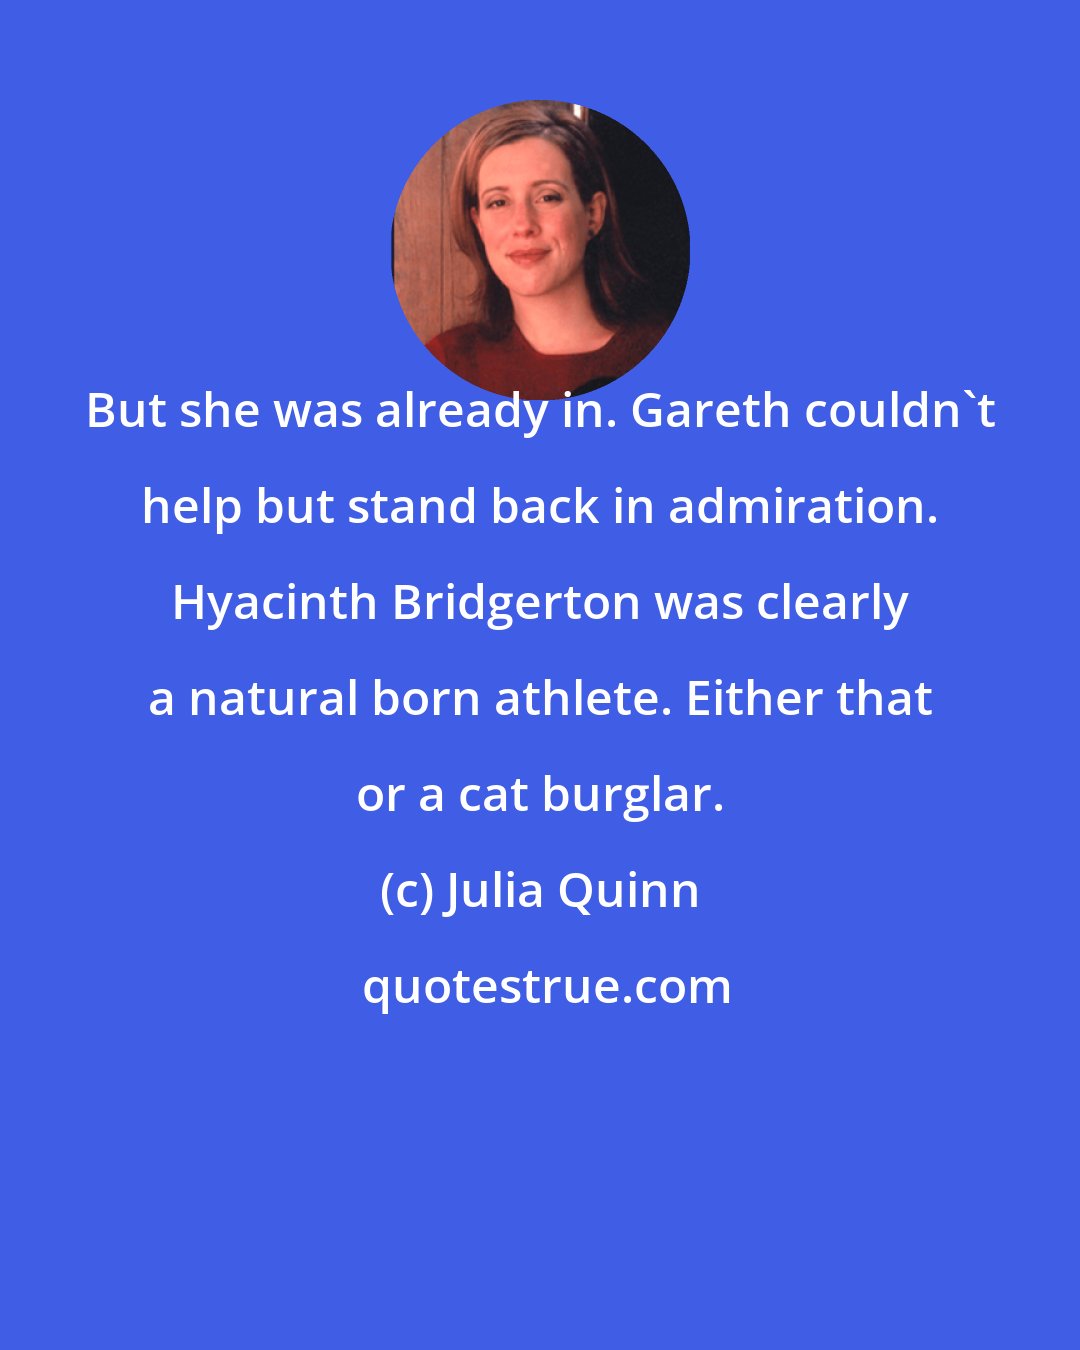 Julia Quinn: But she was already in. Gareth couldn't help but stand back in admiration. Hyacinth Bridgerton was clearly a natural born athlete. Either that or a cat burglar.